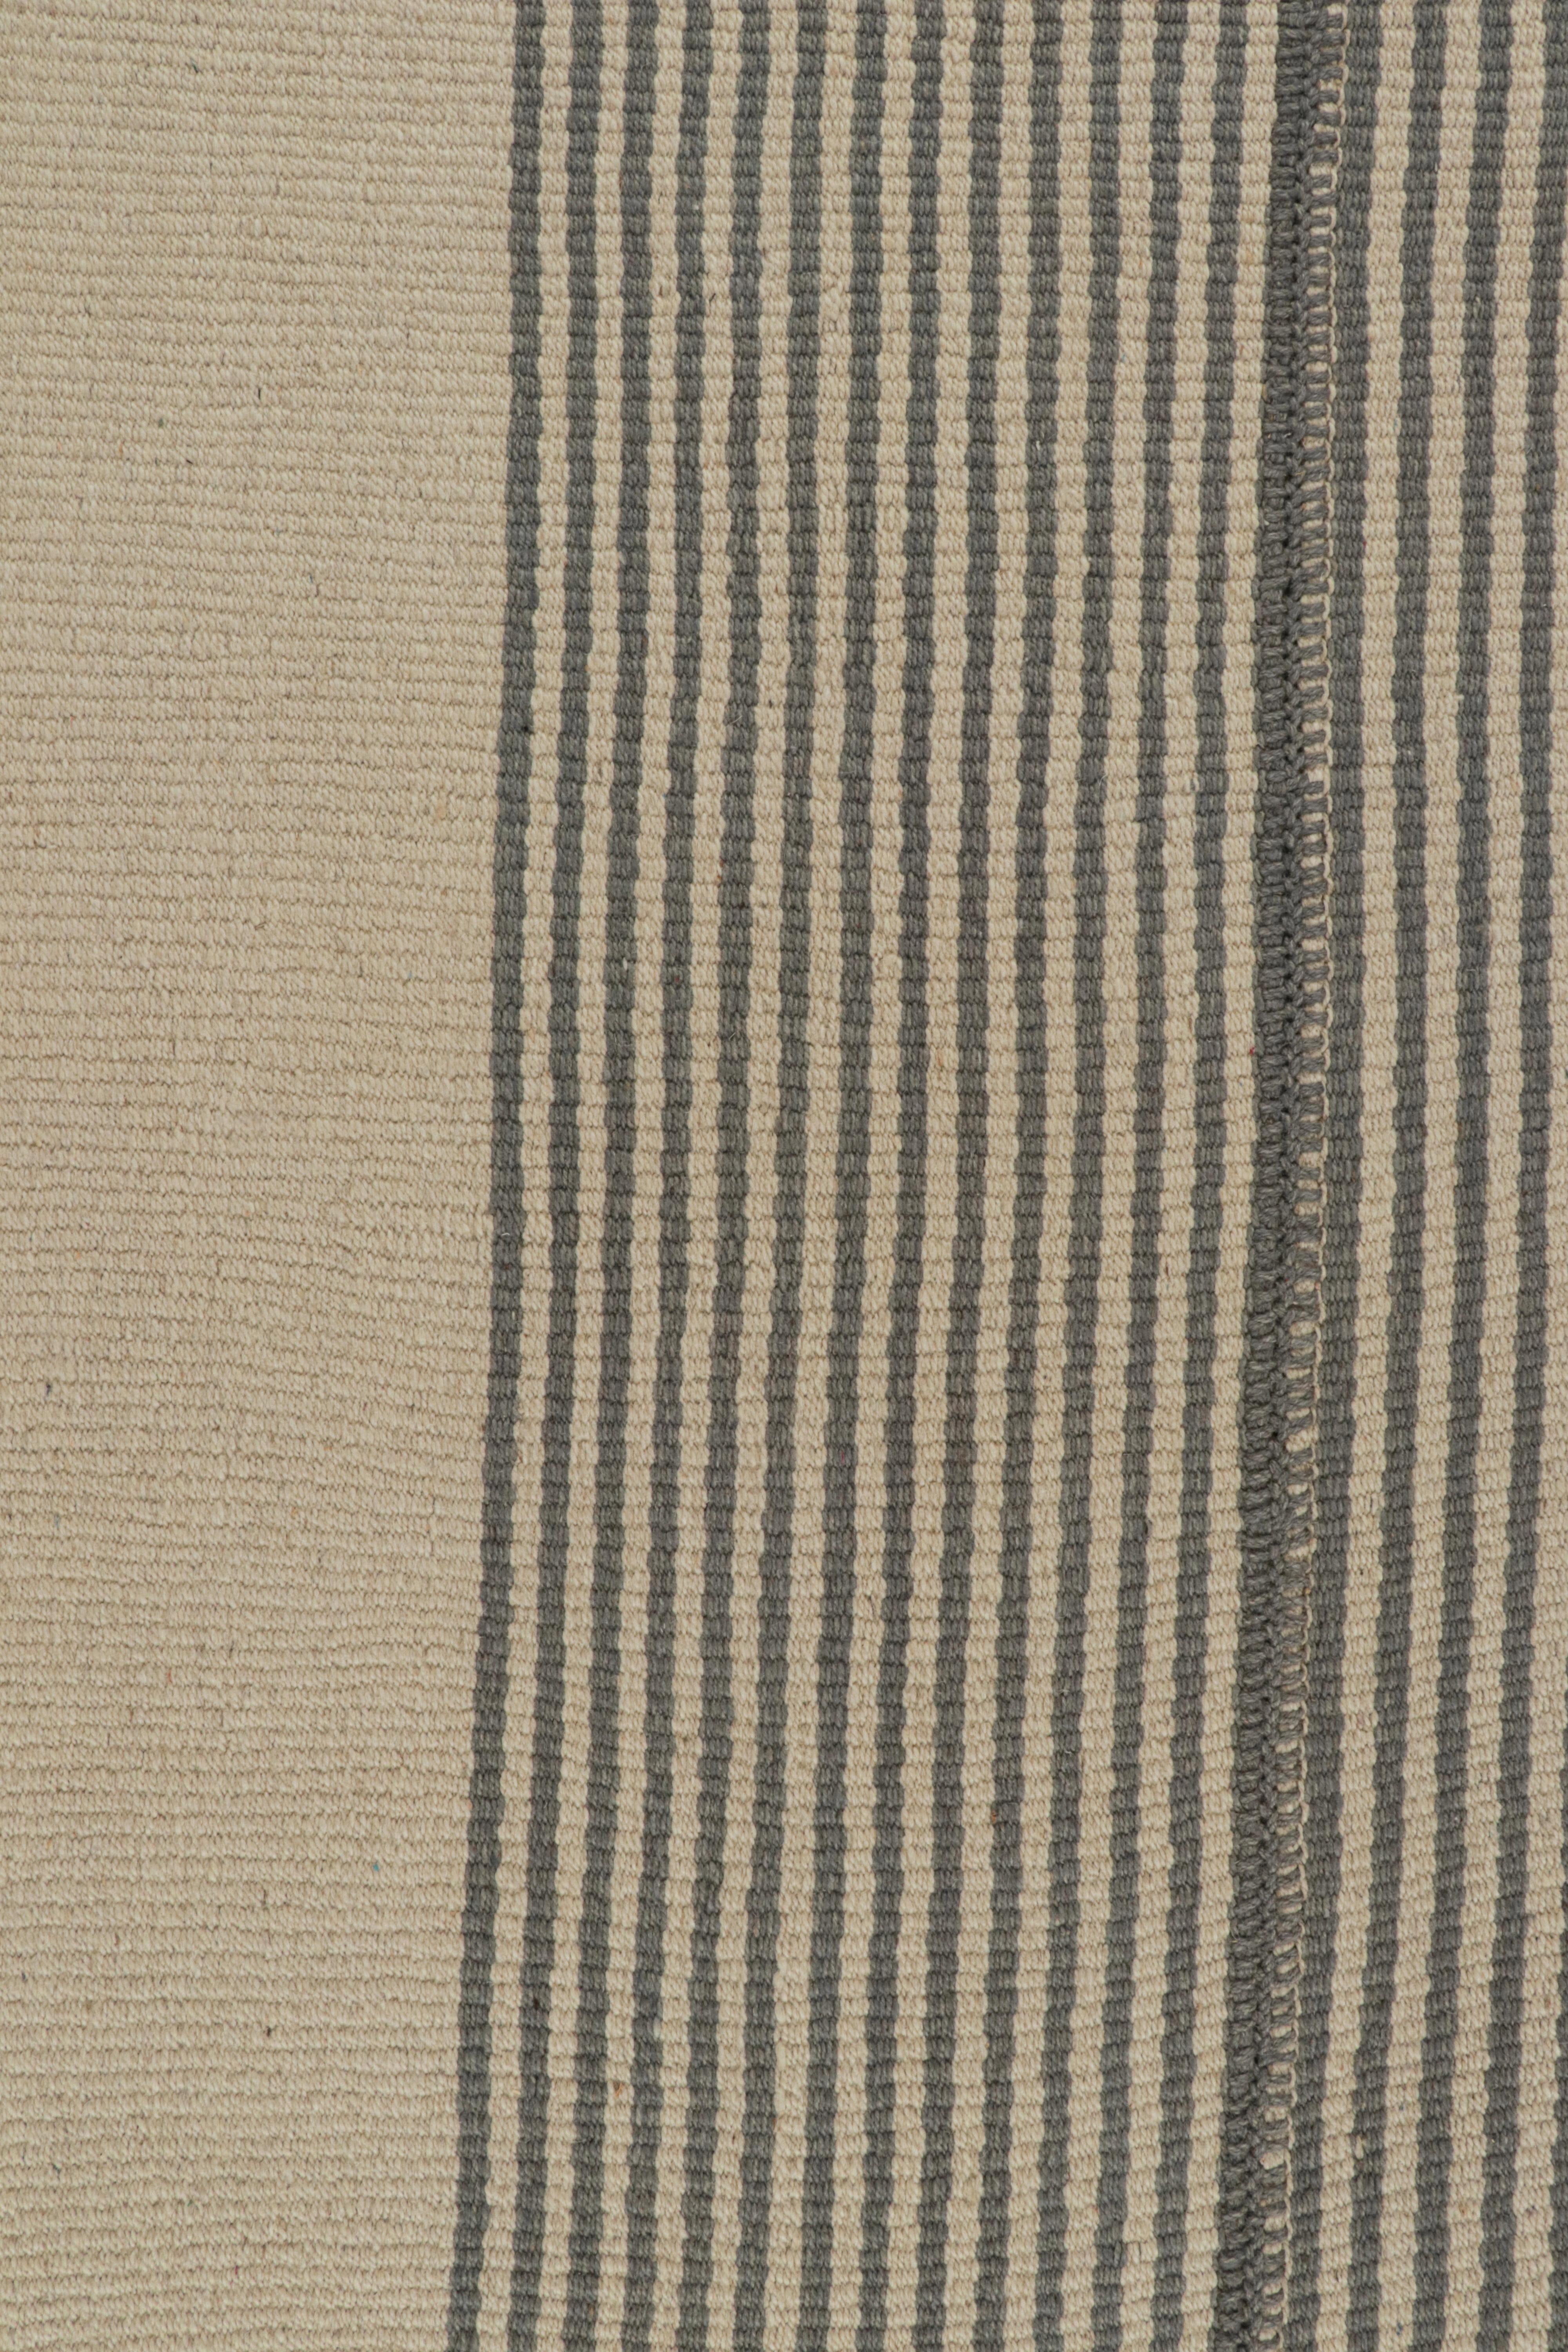 Rug & Kilim’s Contemporary Kilim, with Vertical Stripes in Beige and Brown In New Condition For Sale In Long Island City, NY